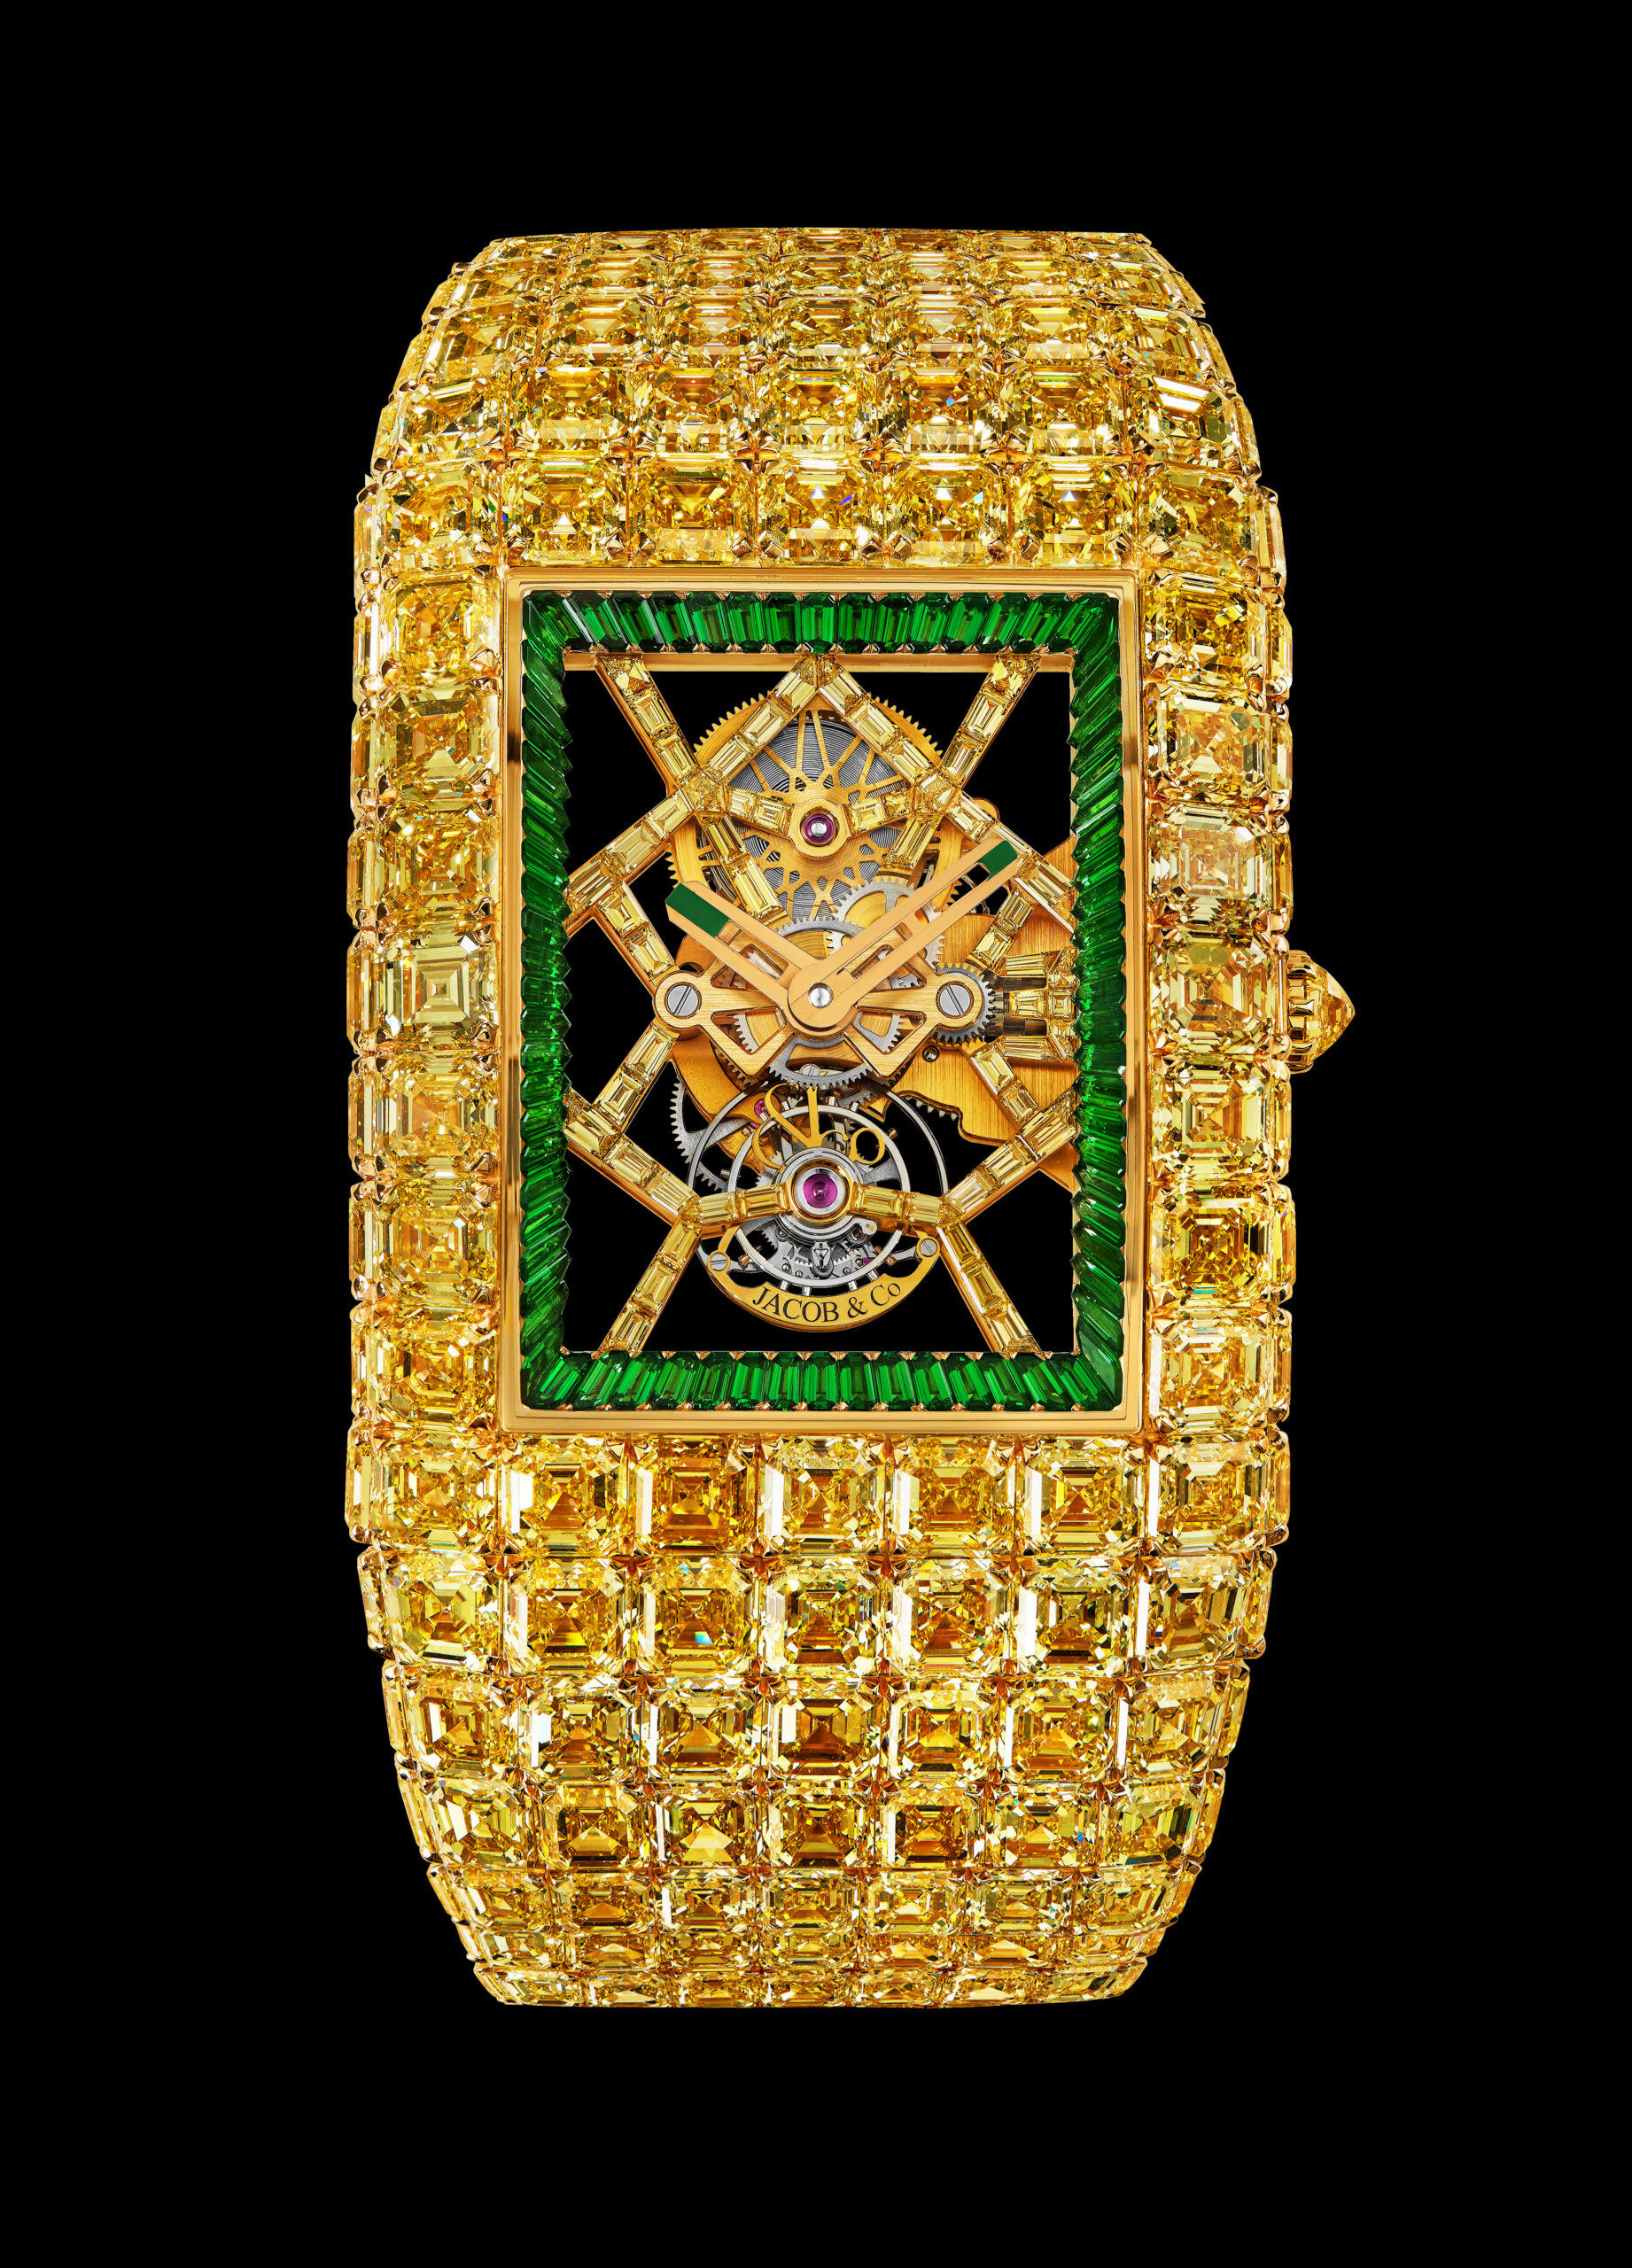 World's most expensive watch is yours for $20 million